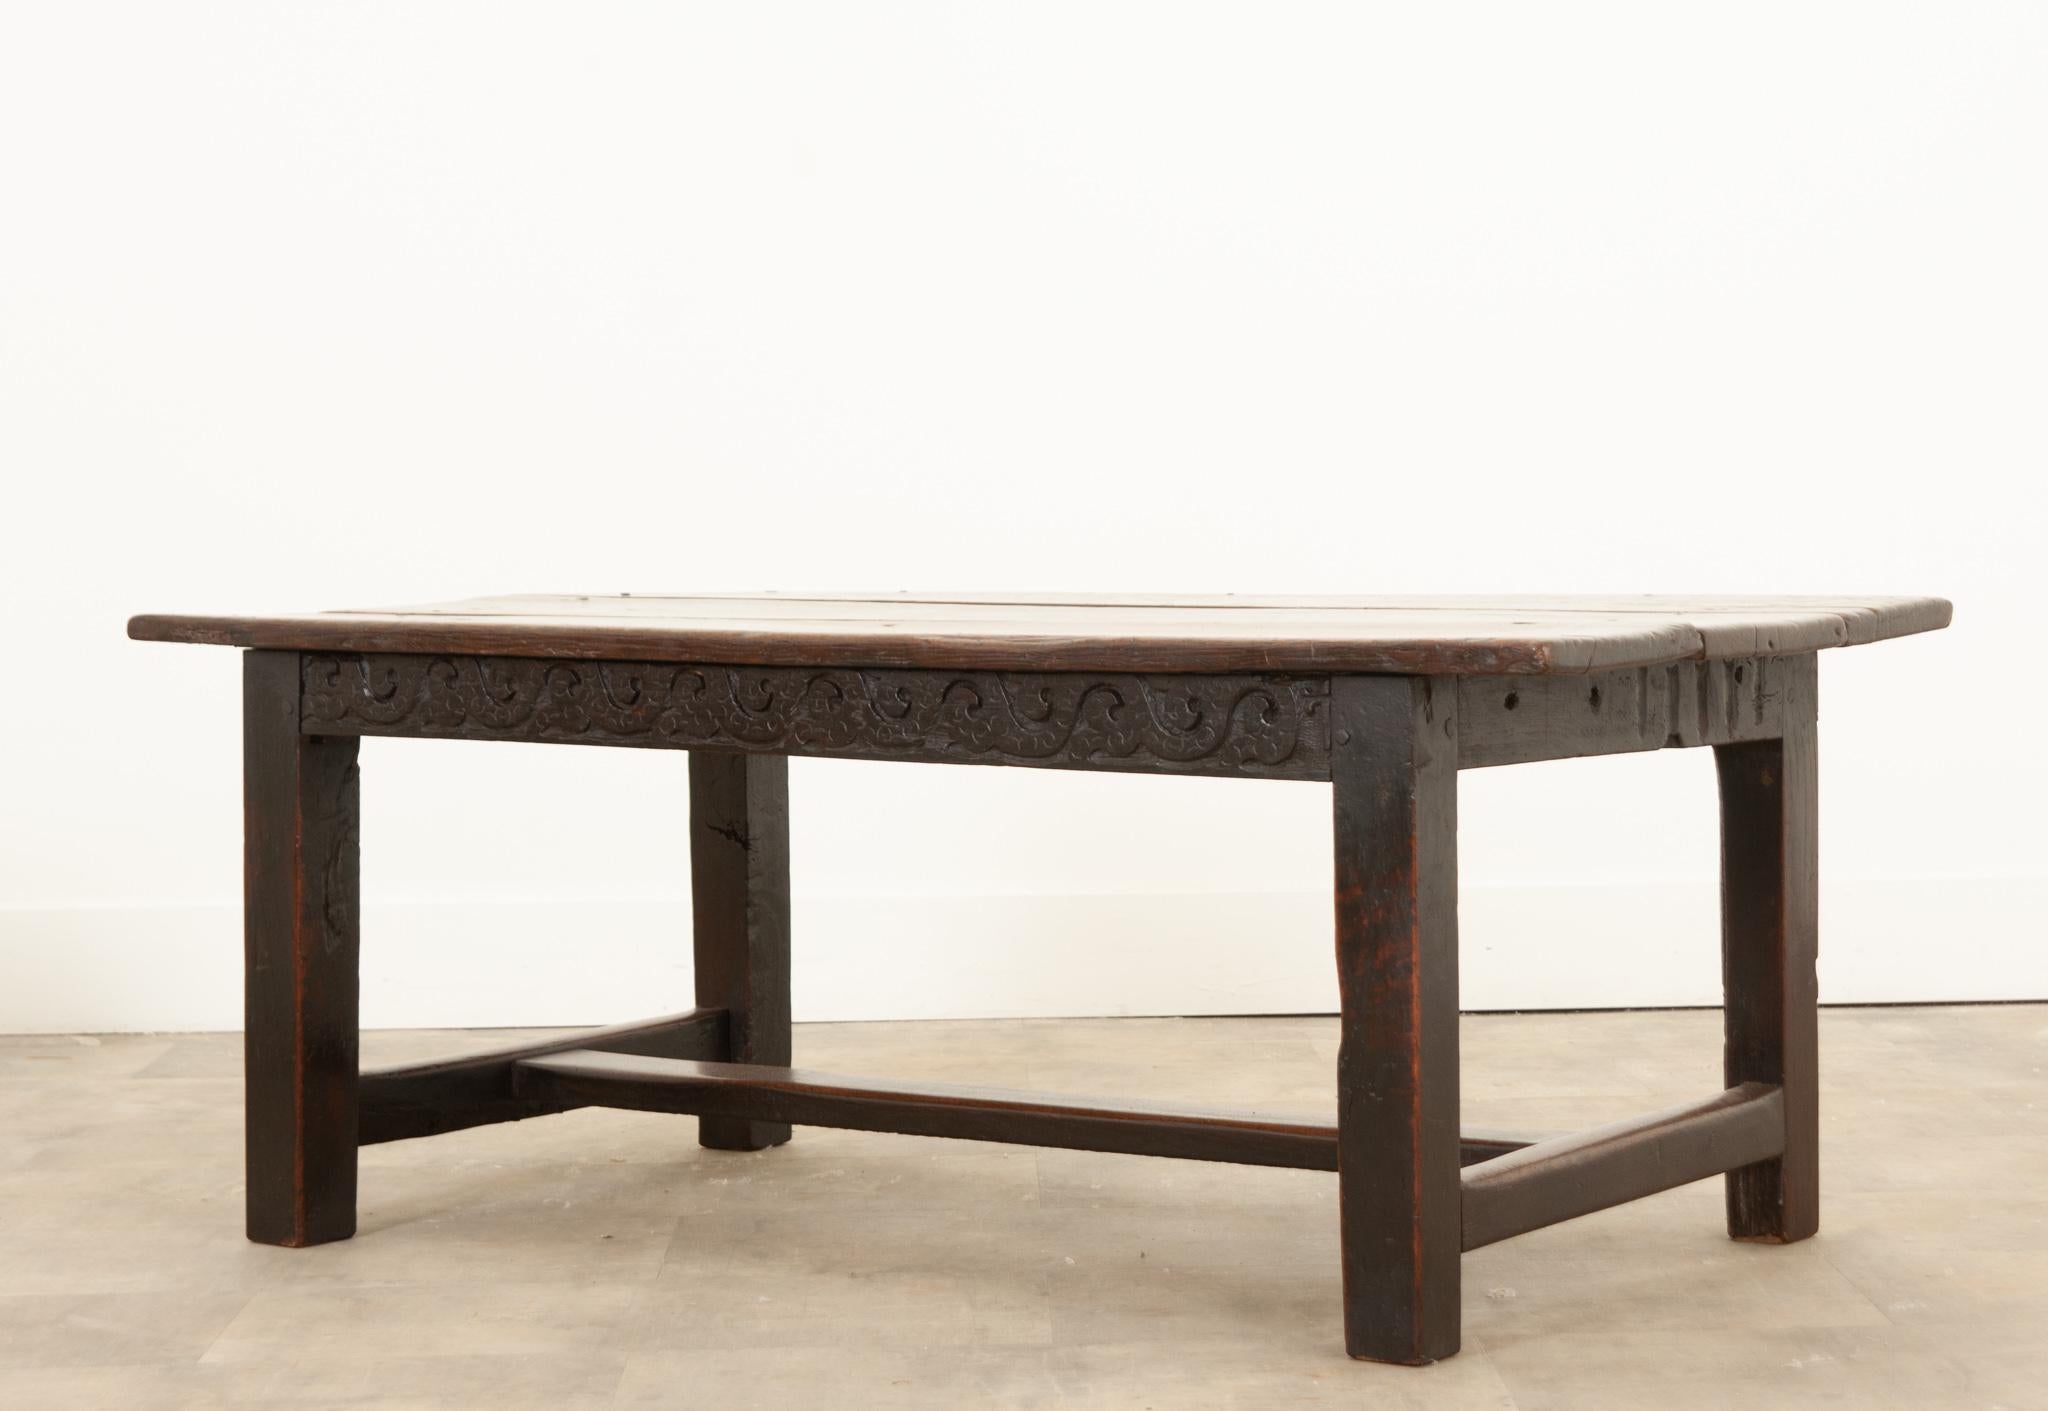 A fantastic piece hand-crafted in England over 300 years ago. A superbly carved oak low table supported by straight square legs attached by a classic H-stretcher that creates an attractive sturdy piece. The construction of the table is solid oak put